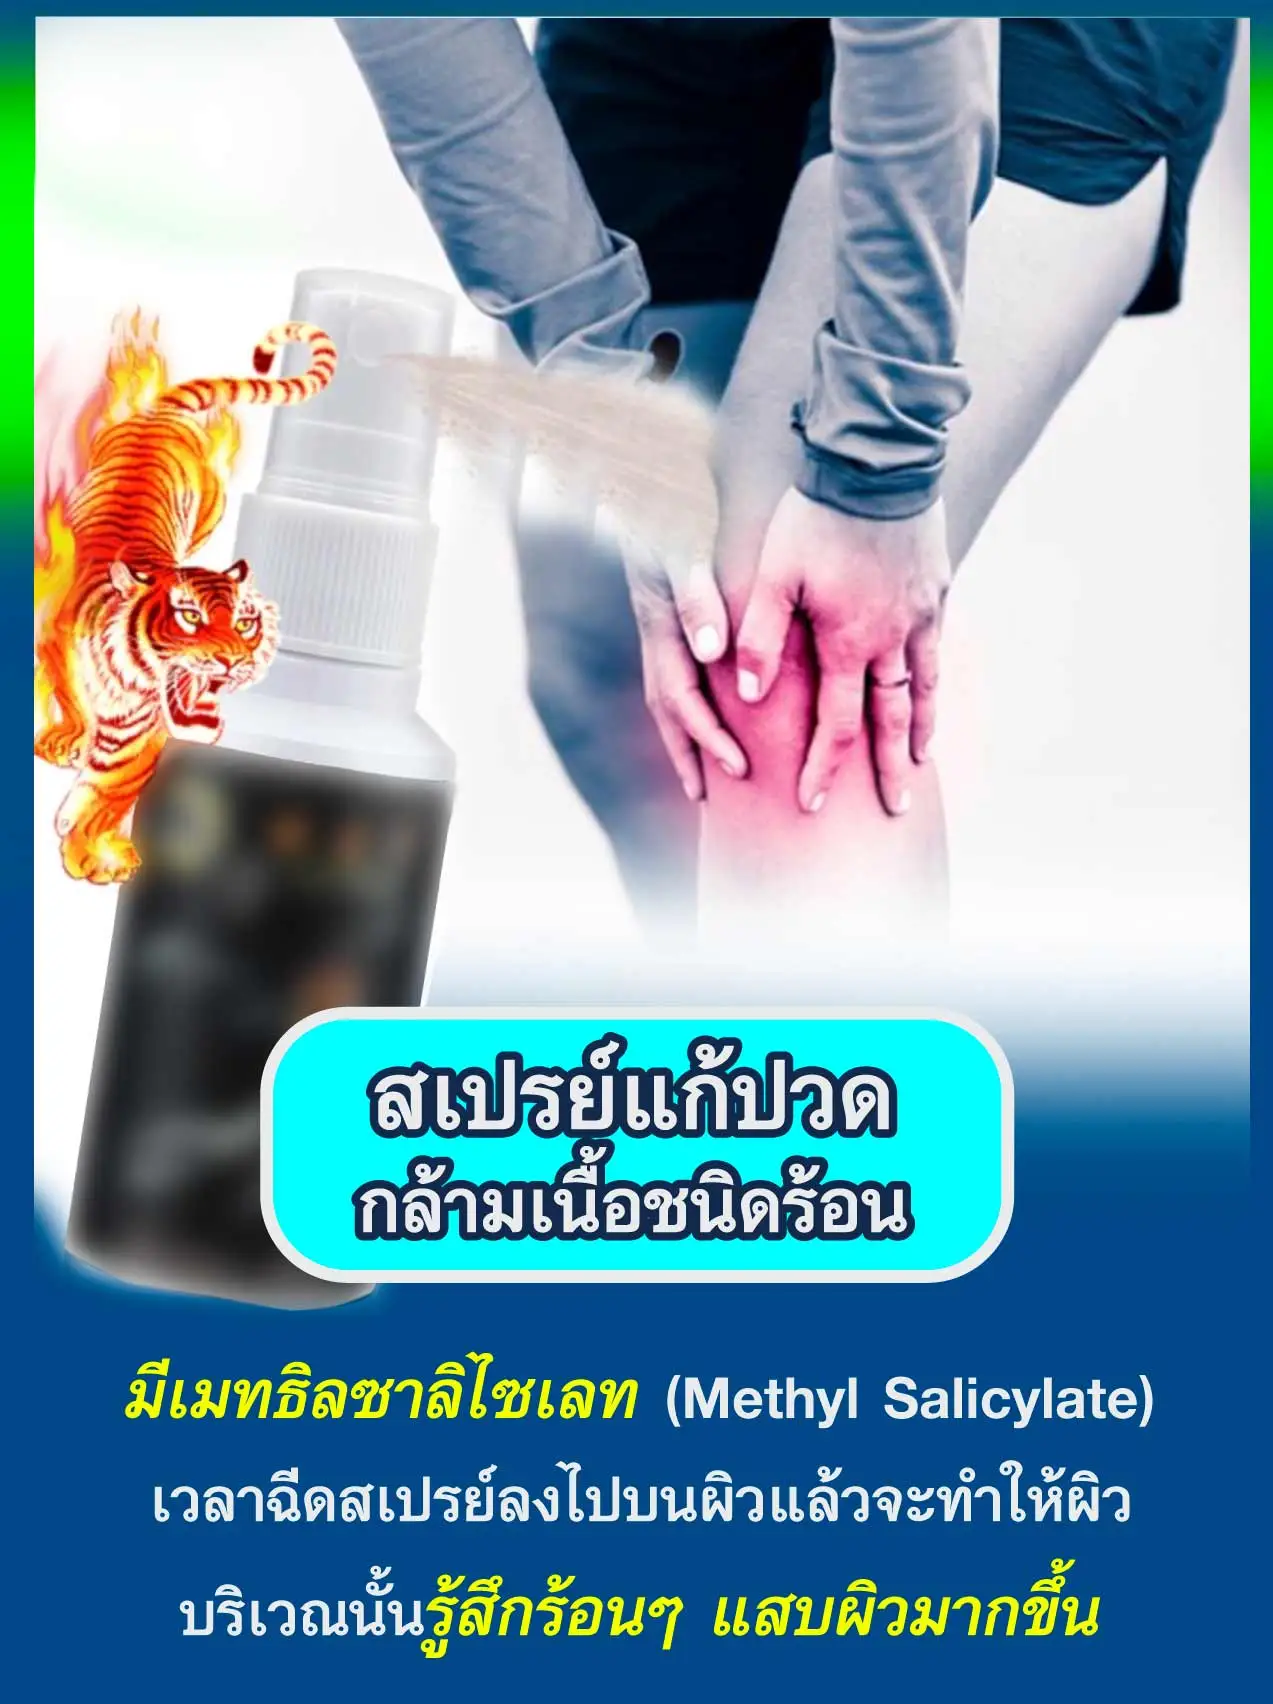 1-3-Knee-joint-spray-Medicine-for-knee-pain-relief